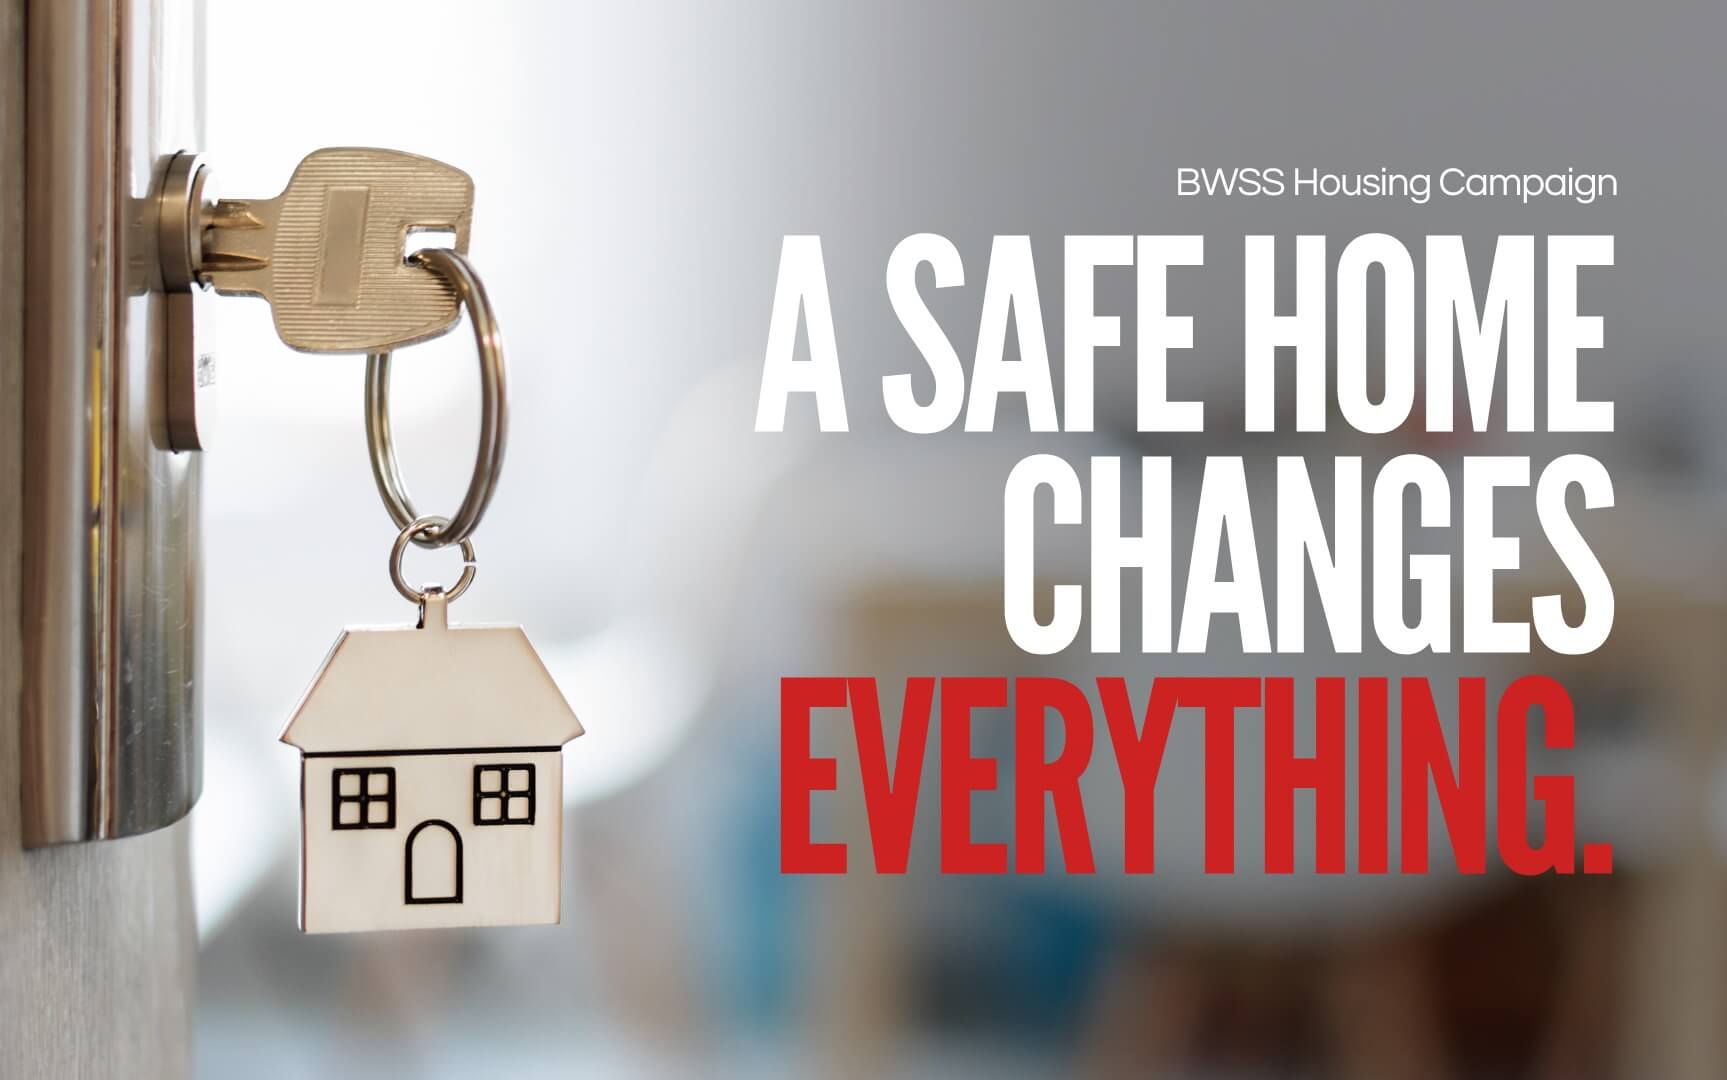 Image of a key in a lock. A Safe Home Changes Everything.